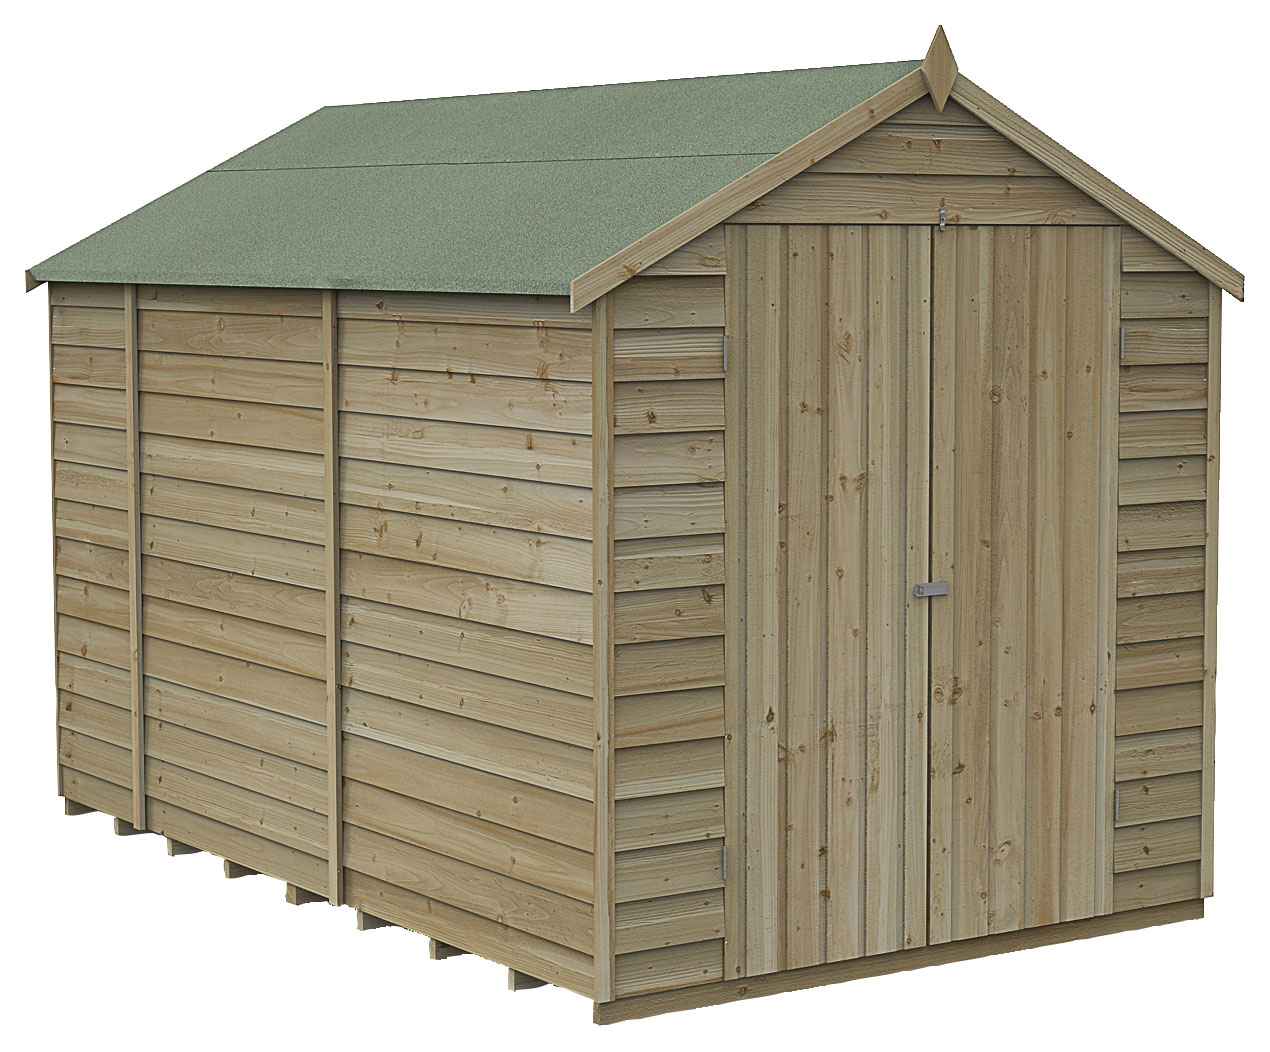 Forest Garden 6 x 10ft 4Life Apex Overlap Pressure Treated Double Door Windowless Shed with Base and Assembly